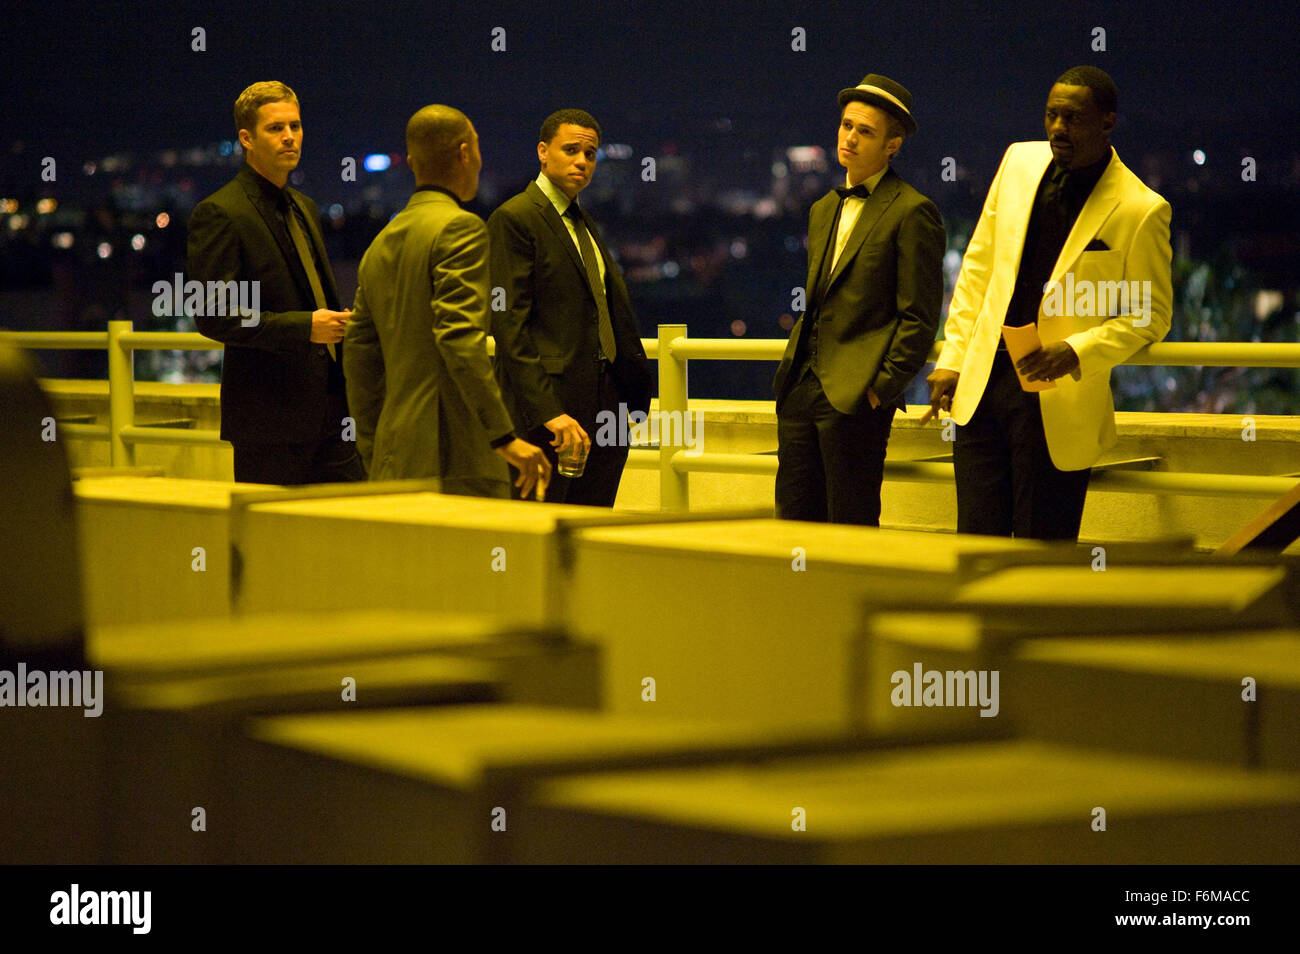 RELEASE DATE: February 26, 2010. MOVIE TITLE: Takers. STUDIO: Screen Gems. PLOT: A group of bank robbers find their 0 million plan interrupted by a hard-boiled detective. PICTURED: (L to R) PAUL WALKER, T.I., MICHAEL EALY, HAYDEN CHRISTENSEN and IDRIS ELBA. Stock Photo